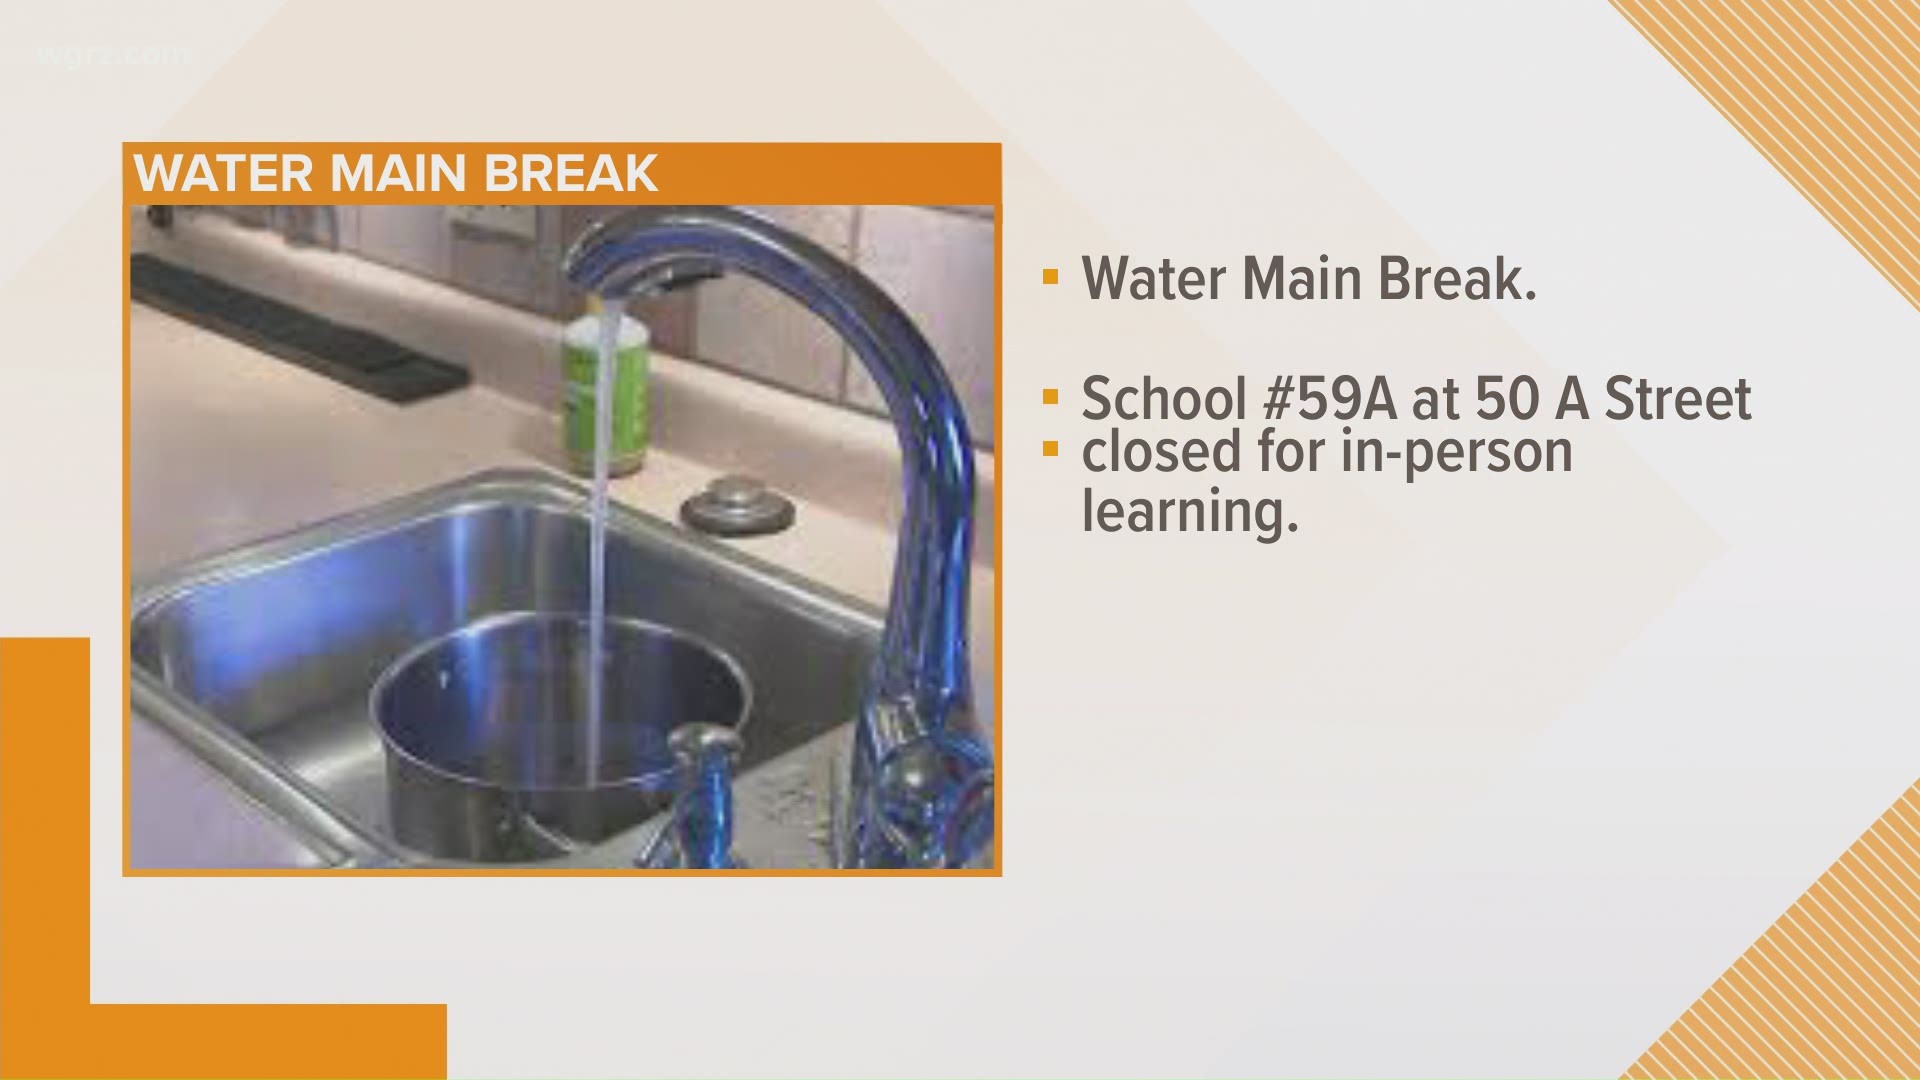 One Buffalo Public School is closed to in-person learning due to a water main break.